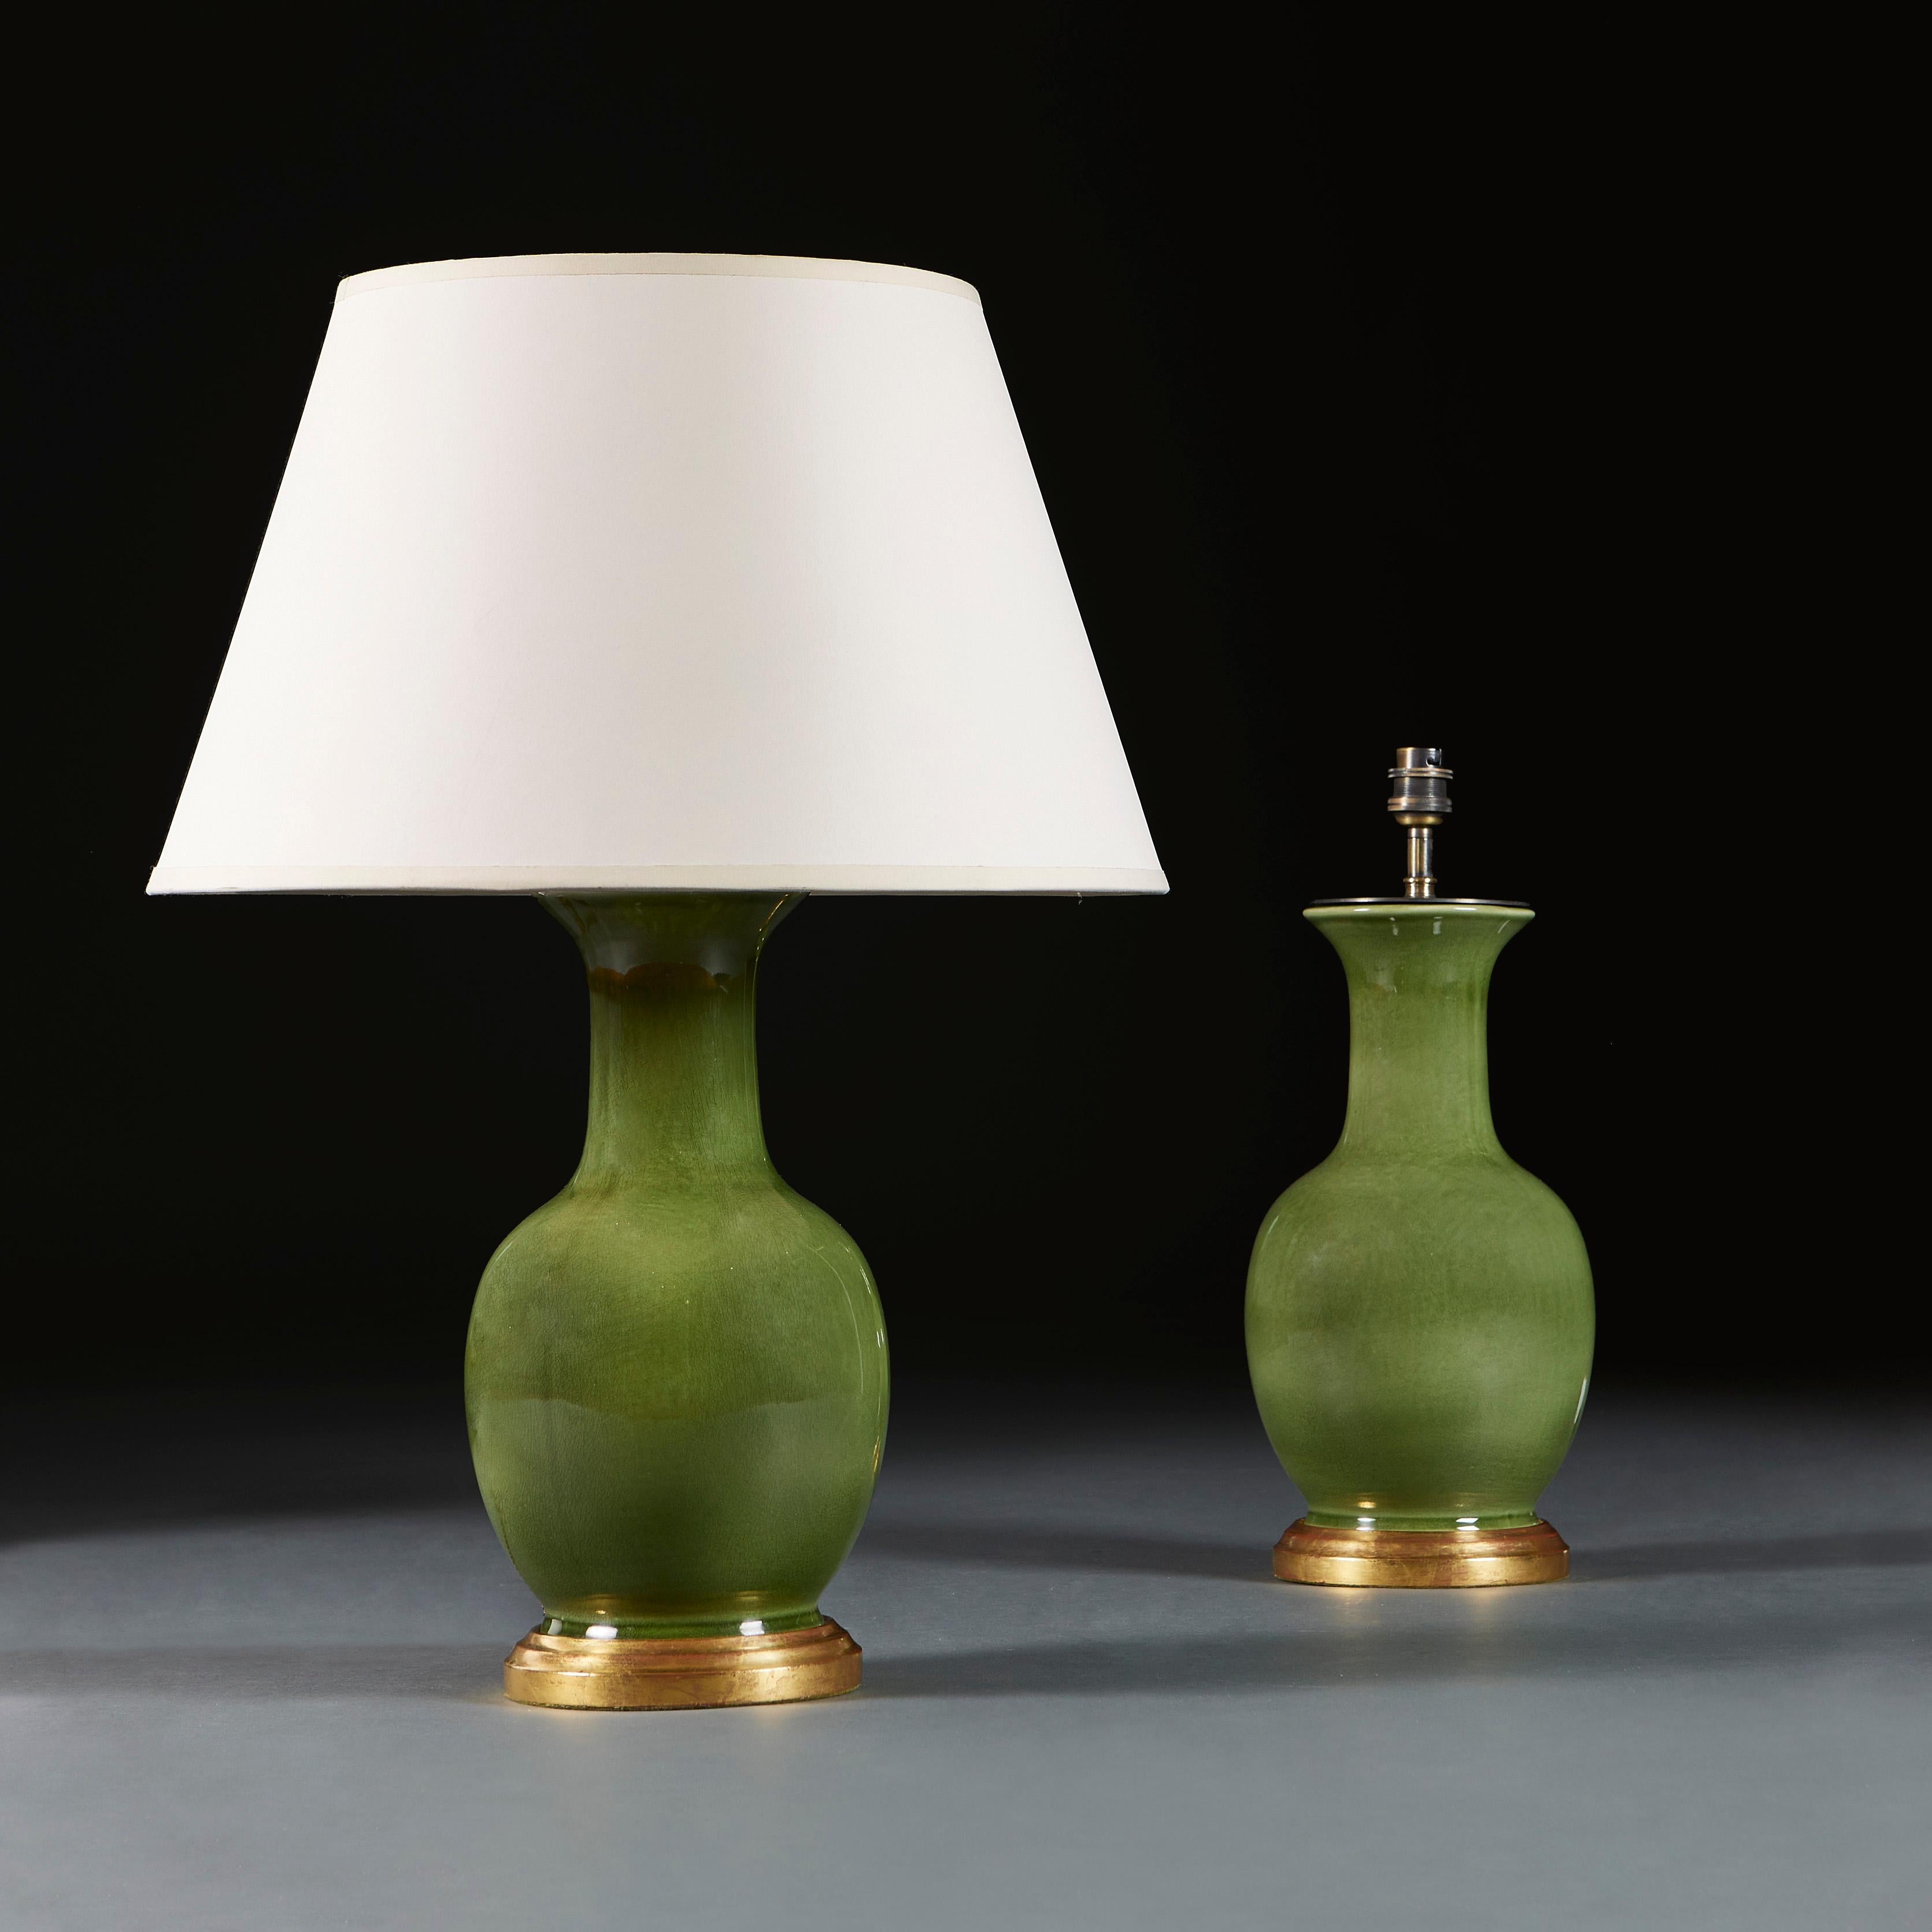 China, circa 1900

A pair of late nineteenth century Chinese bottle neck vases with dark Celadon glaze, now mounted as lamps with turned gitlwood bases.

Height 33.00cm
Height with shade 57.00cm
Diameter of base 14.00cm.

Please note: This is